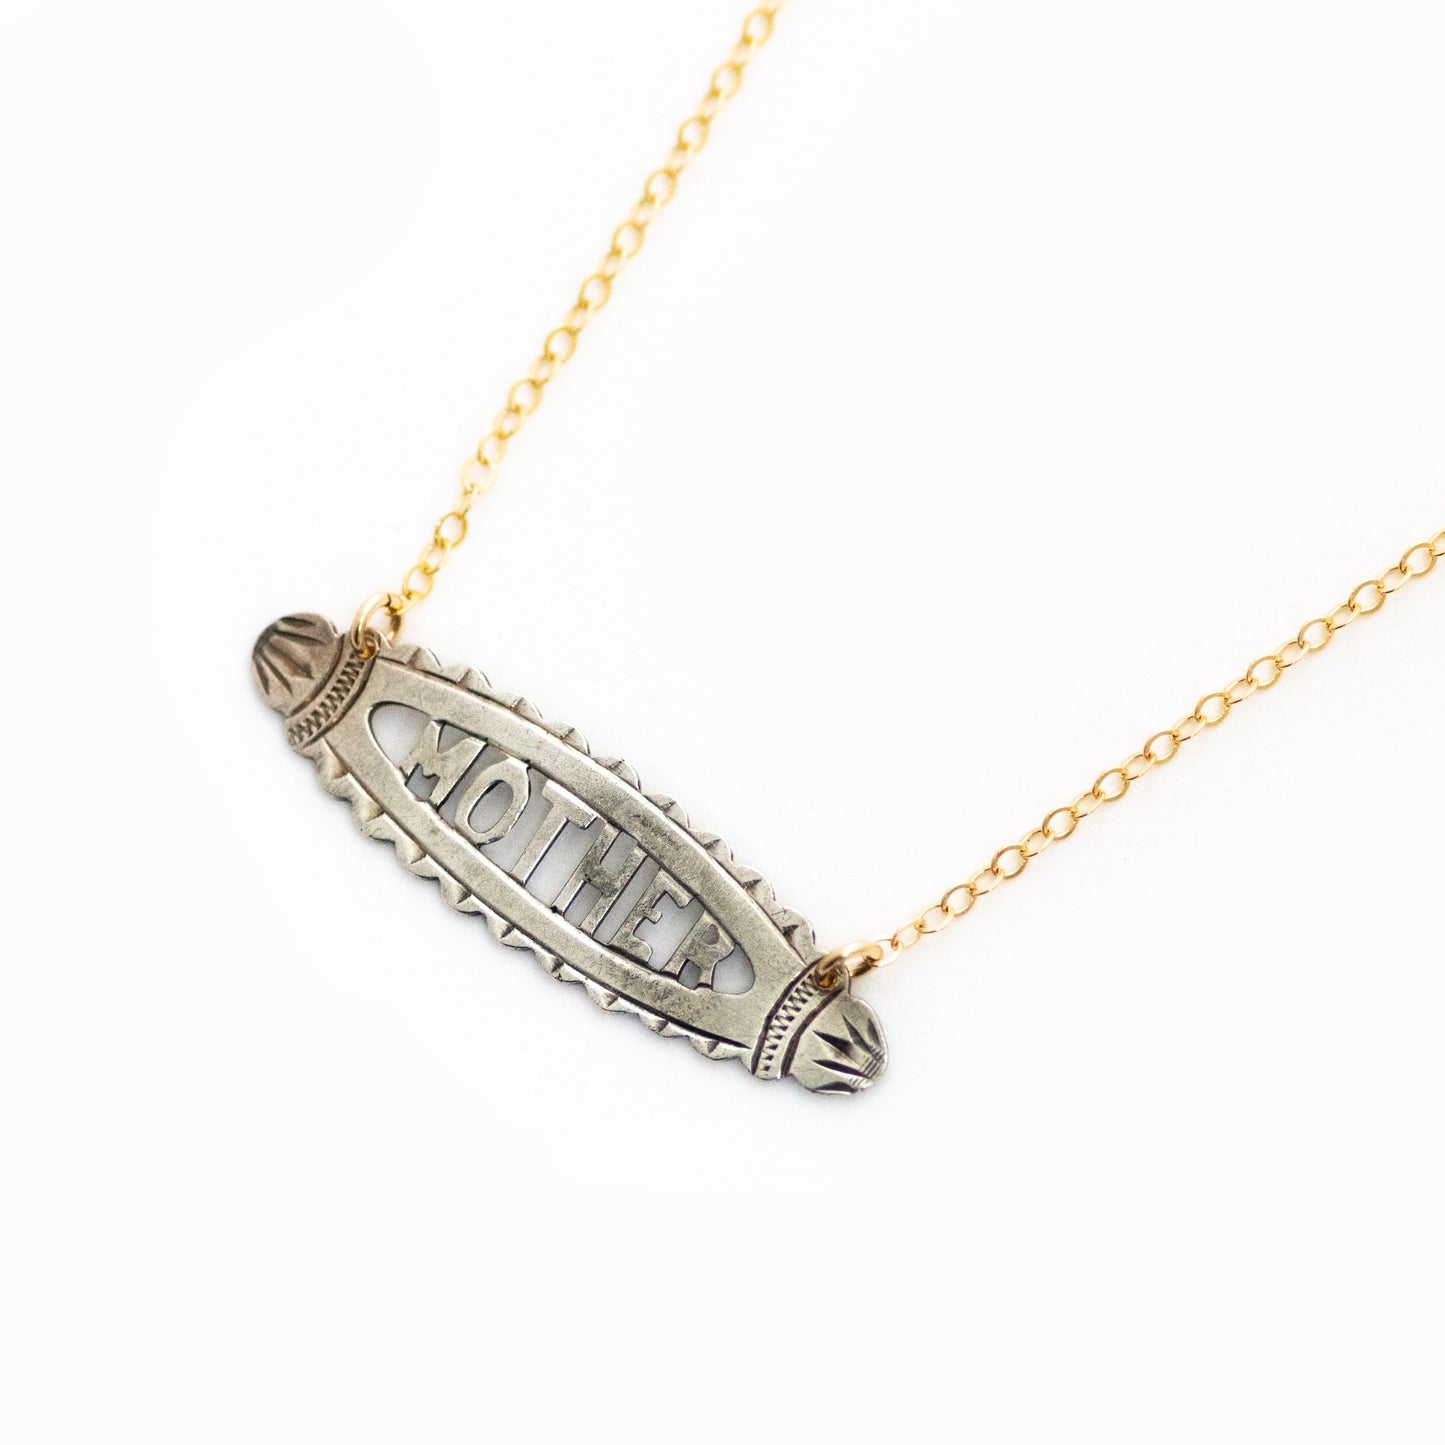 This antique conversion necklace is made up of:  Sterling silver Victorian bar pin pendant from the late 1800s with hand fabricated details depicting the word "MOTHER". Arranged at an angle from a 14k gold filled cable chain that extends toward the top right corner..